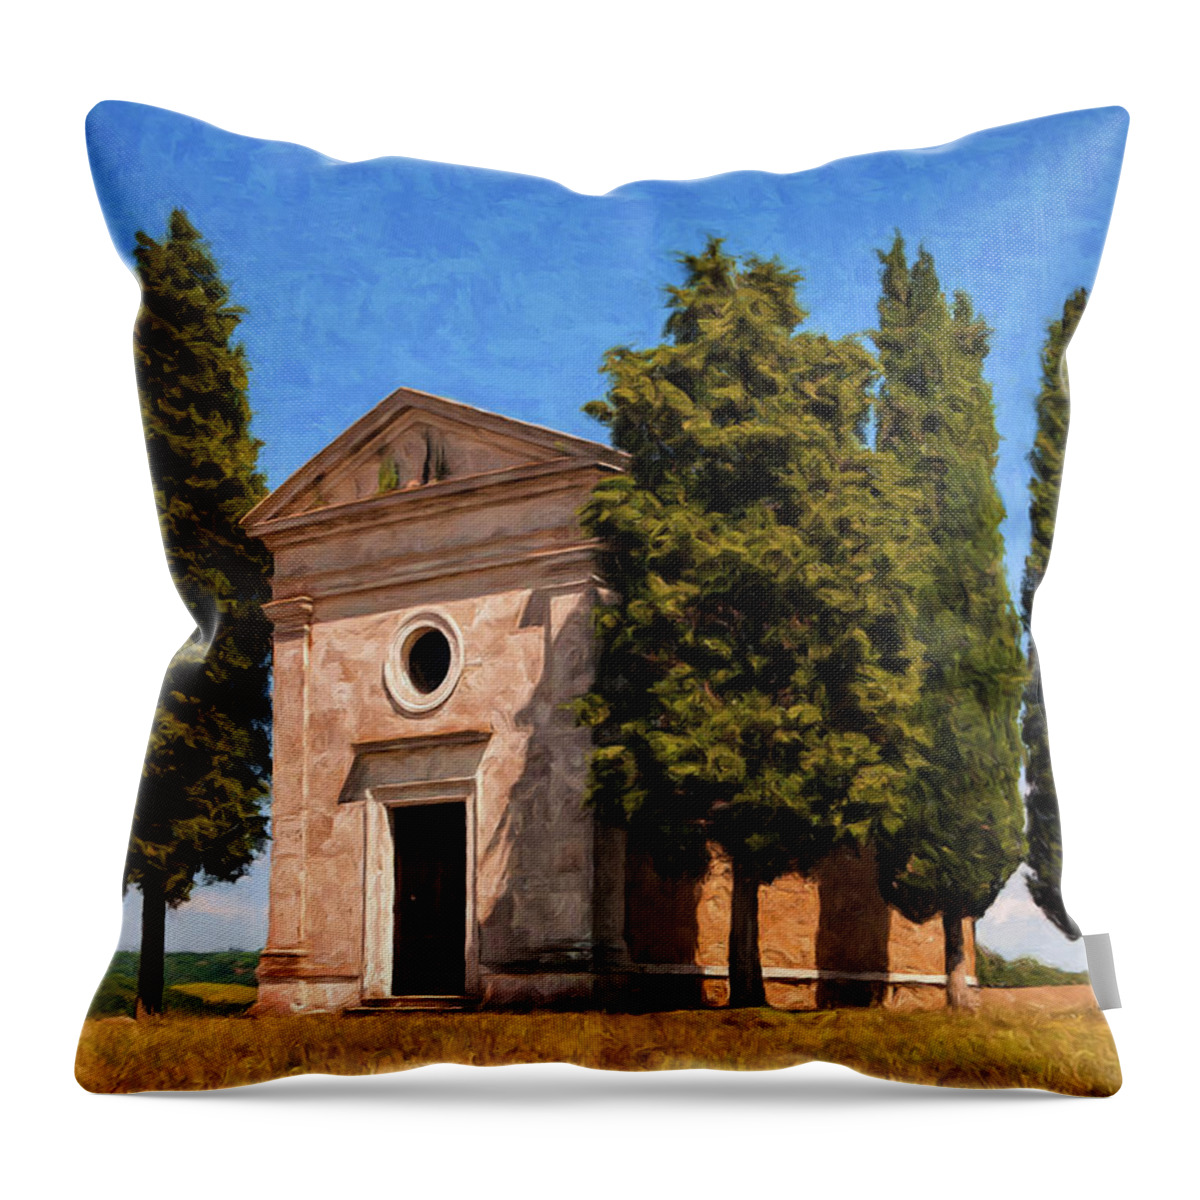 Italy Throw Pillow featuring the painting Hilltop Chapel Tuscany by Dominic Piperata